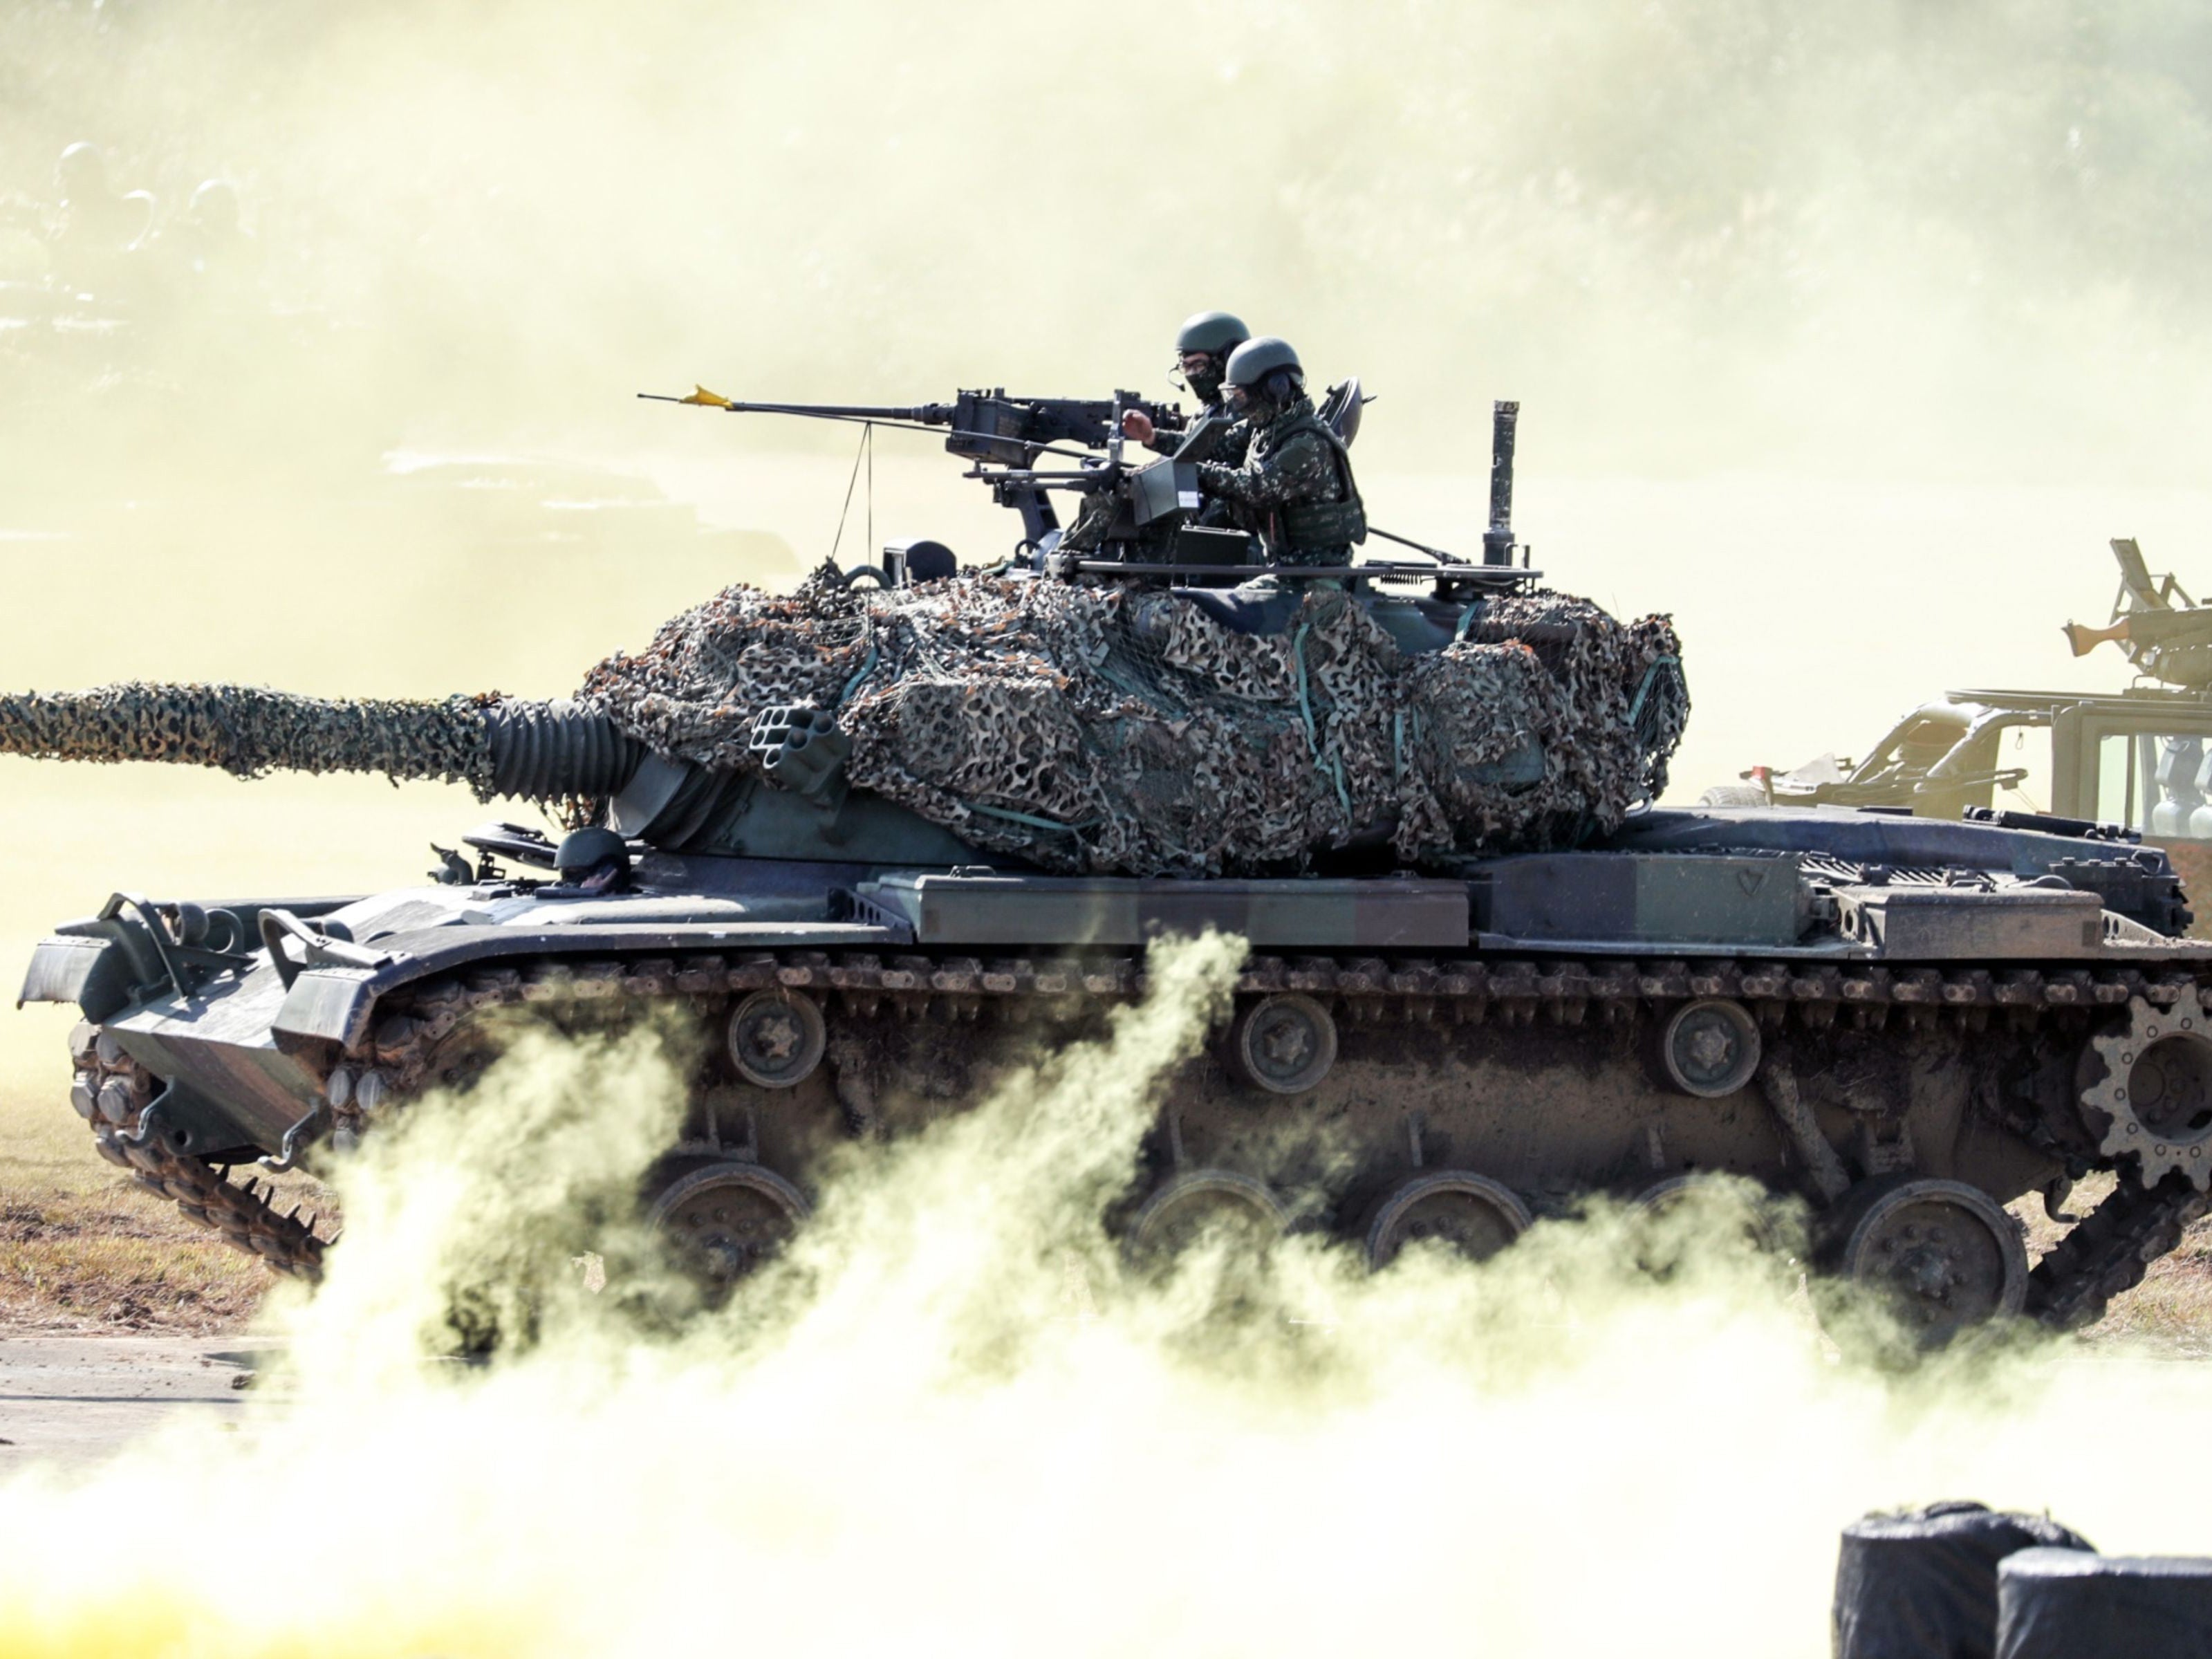 Battle ready: Taiwan soldiers drive a CM-11 Brave Tiger battle tank during a military exercise in Taiwan